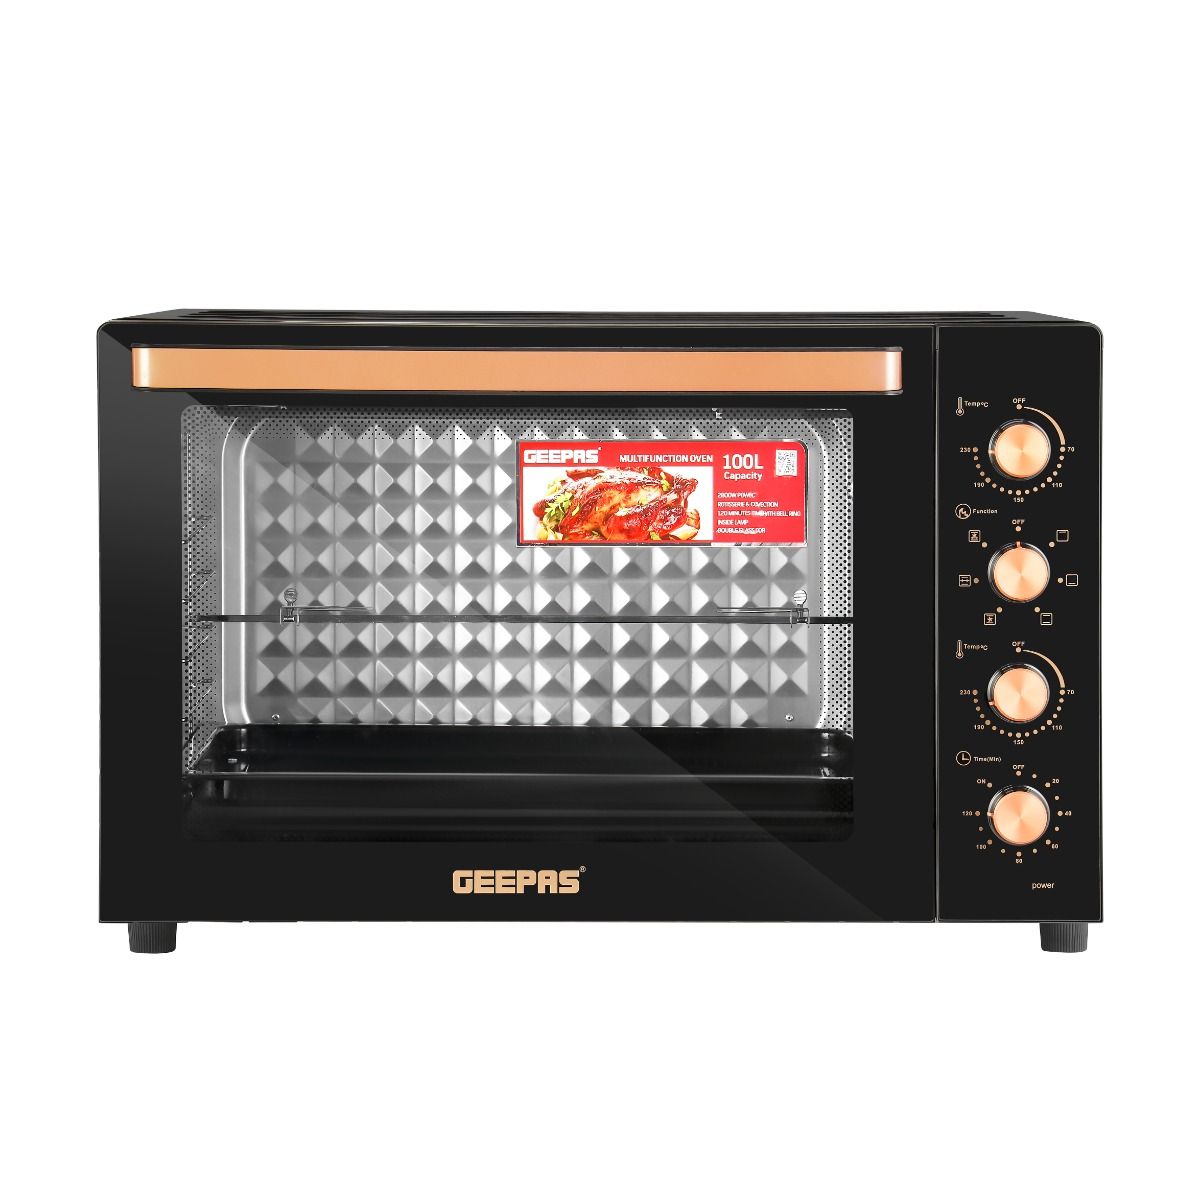 Geepas 100 L Multifunctional Oven- GO34059| 2800 W, With Rotisserie, Convection Functions And Inner Lamp| Easy To Use Control Knobs, 7 Stages Heating Selector, Adjustable Temperature| Perfect For Baking, Roasting, Cooking Meat, Vegetables, Cakes